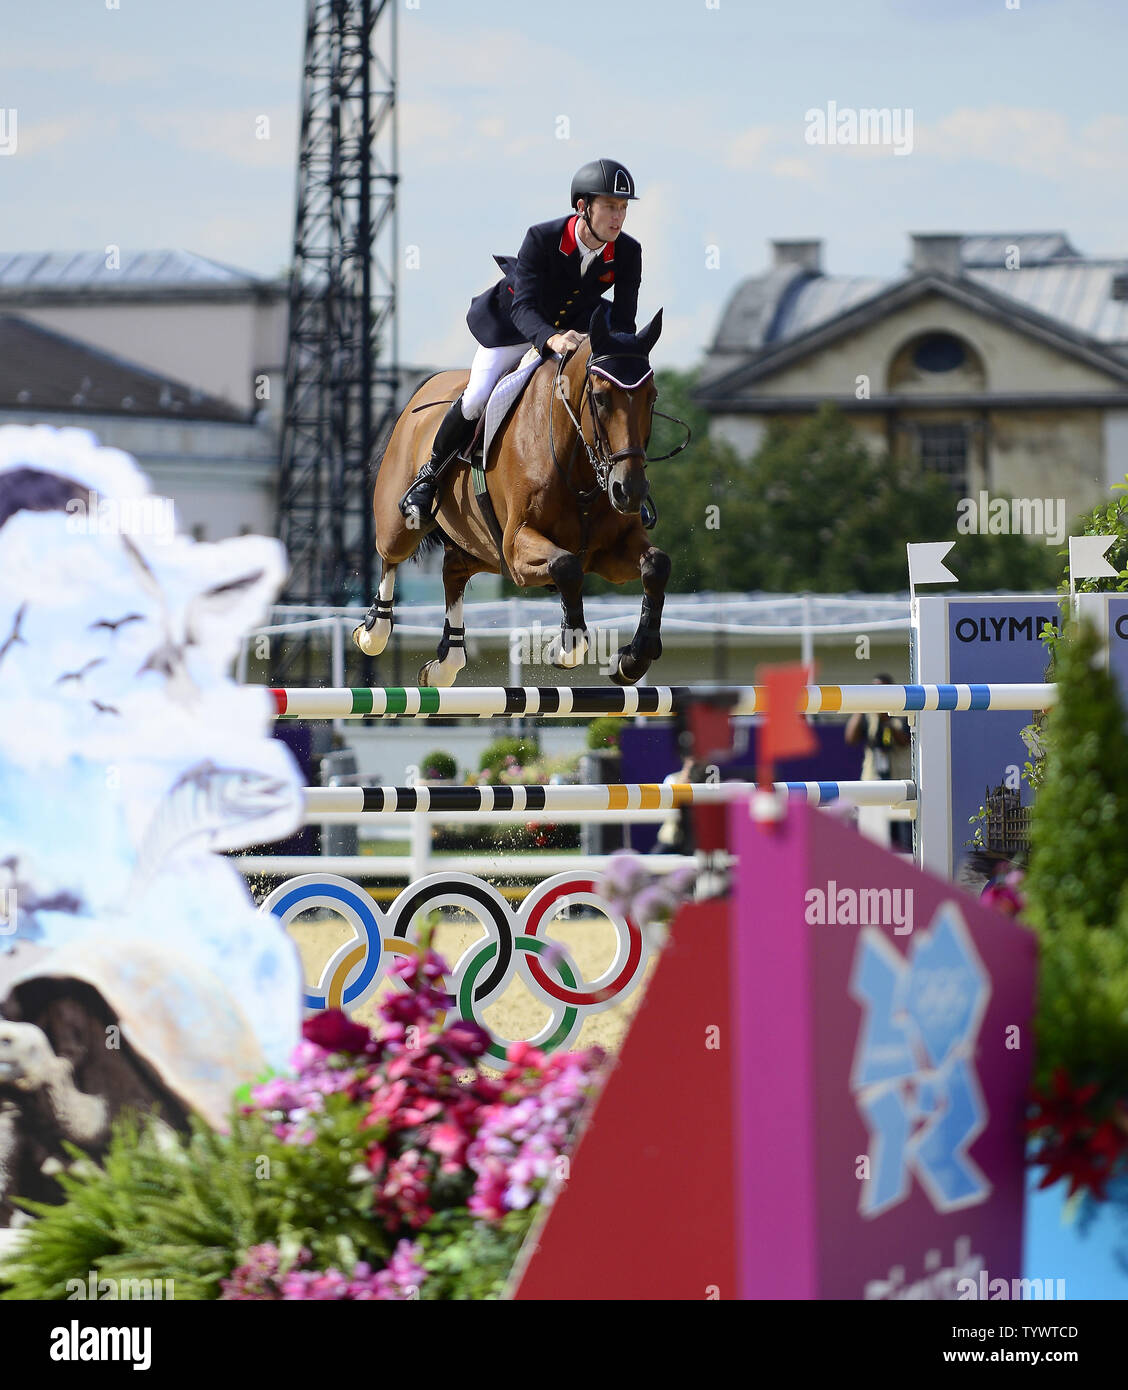 Scott Brash of Great Britain, riding Hello Sanctos, competes in the Equestrian 3rd Qualifier Individual competition and round 2 of the Team Jumping competition at the London 2012 Summer Olympics on August 5, 2012 in London.  The Great Britain team captured the Gold Medal.  UPI/Ron Sachs Stock Photo